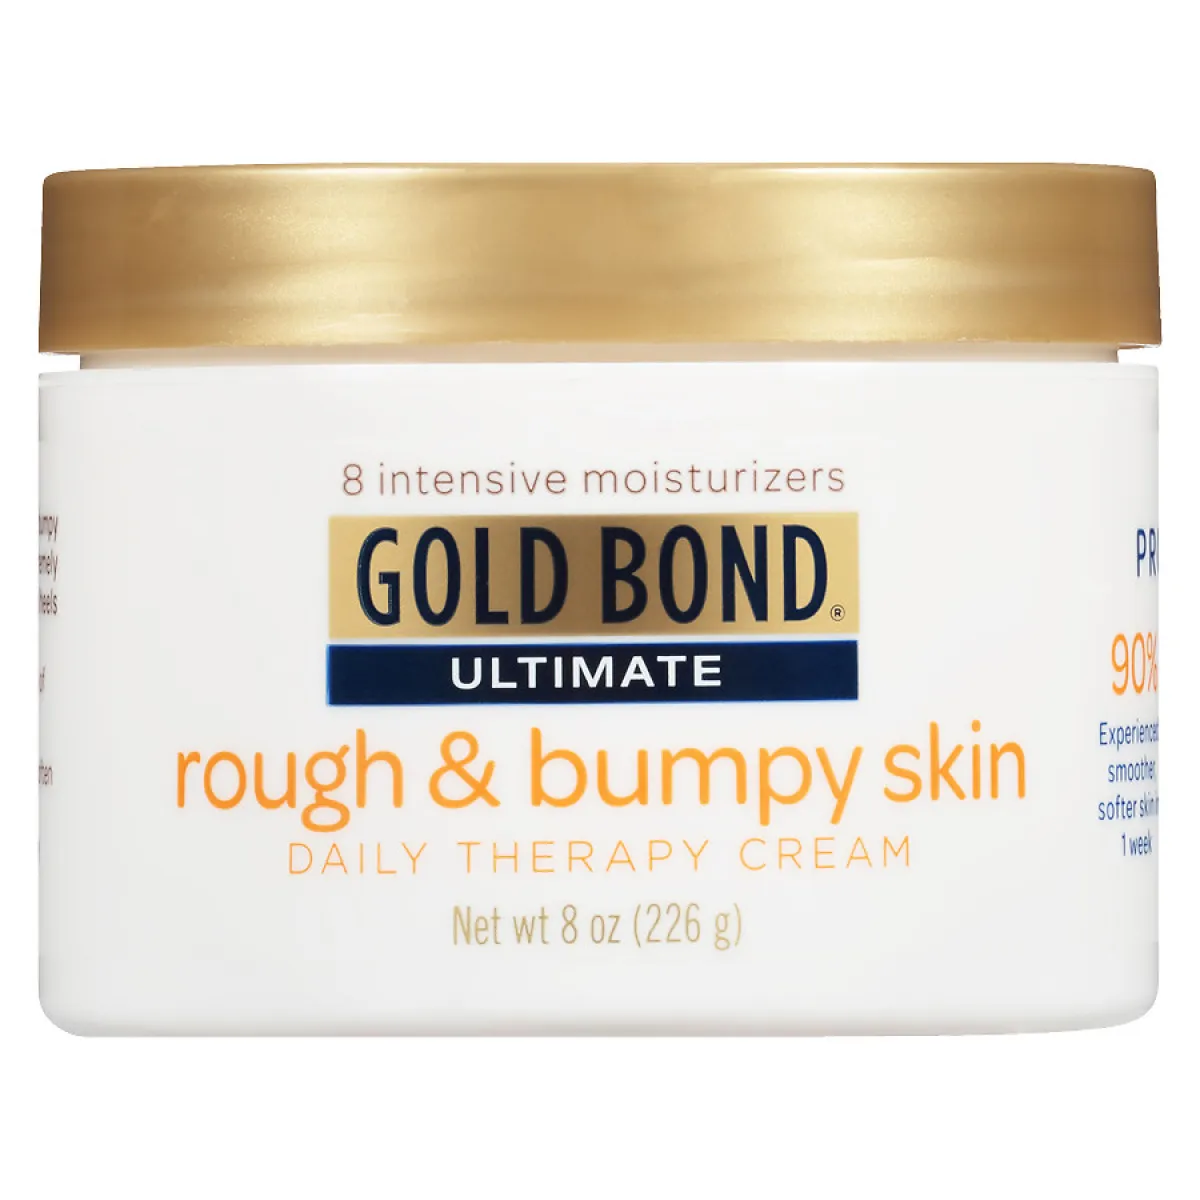 Rough & Bumpy Skin Daily Therapy Cream by Gold Bond, after one week, 90% of users experienced smoother, softer skin.